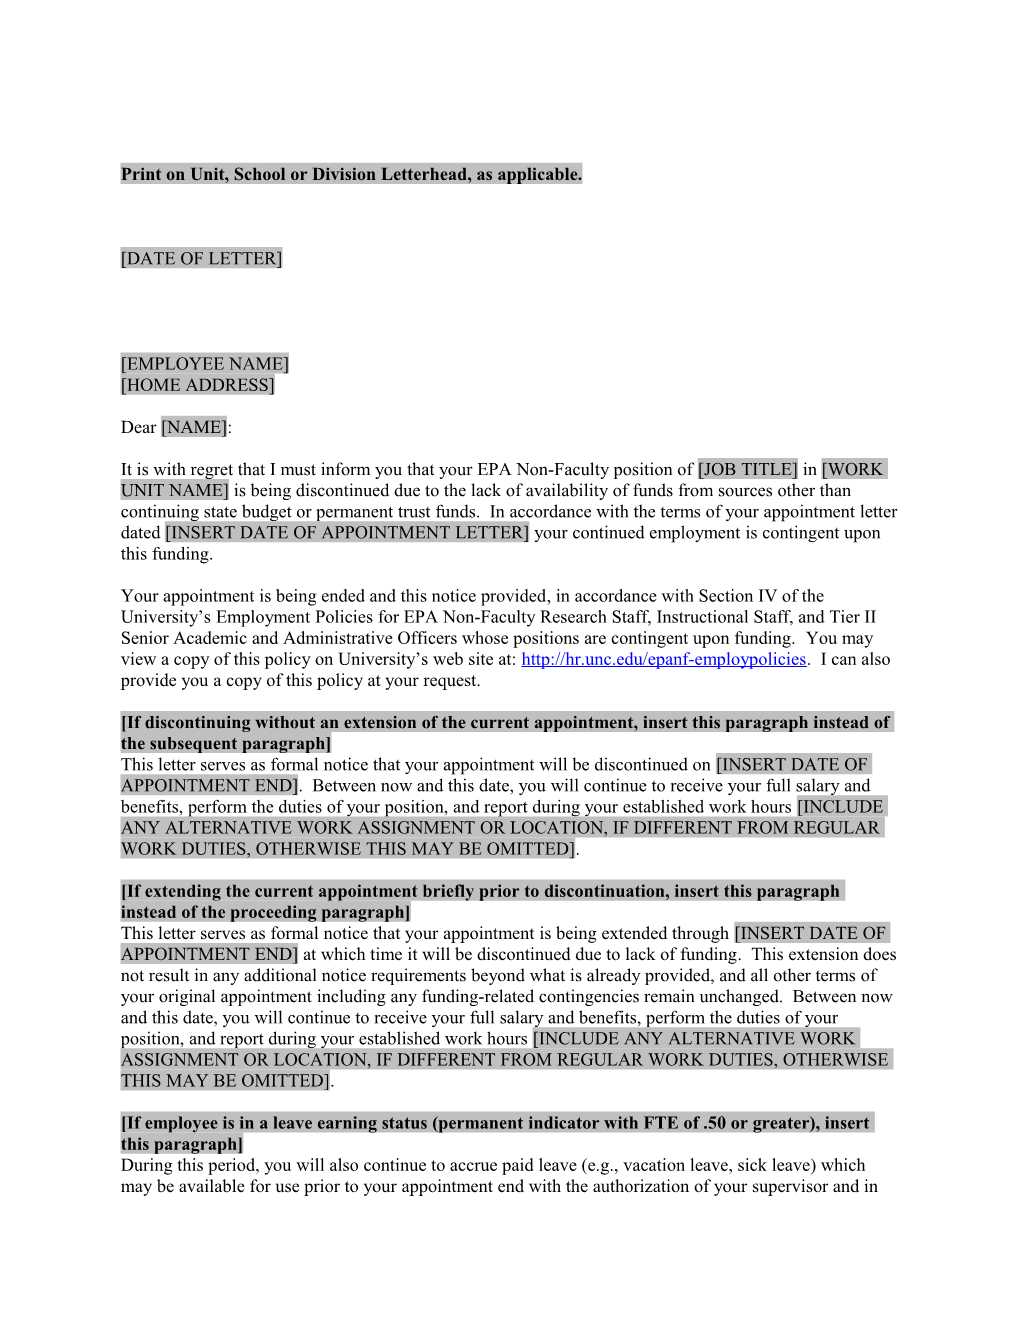 End of at Will Appointment Letter Template